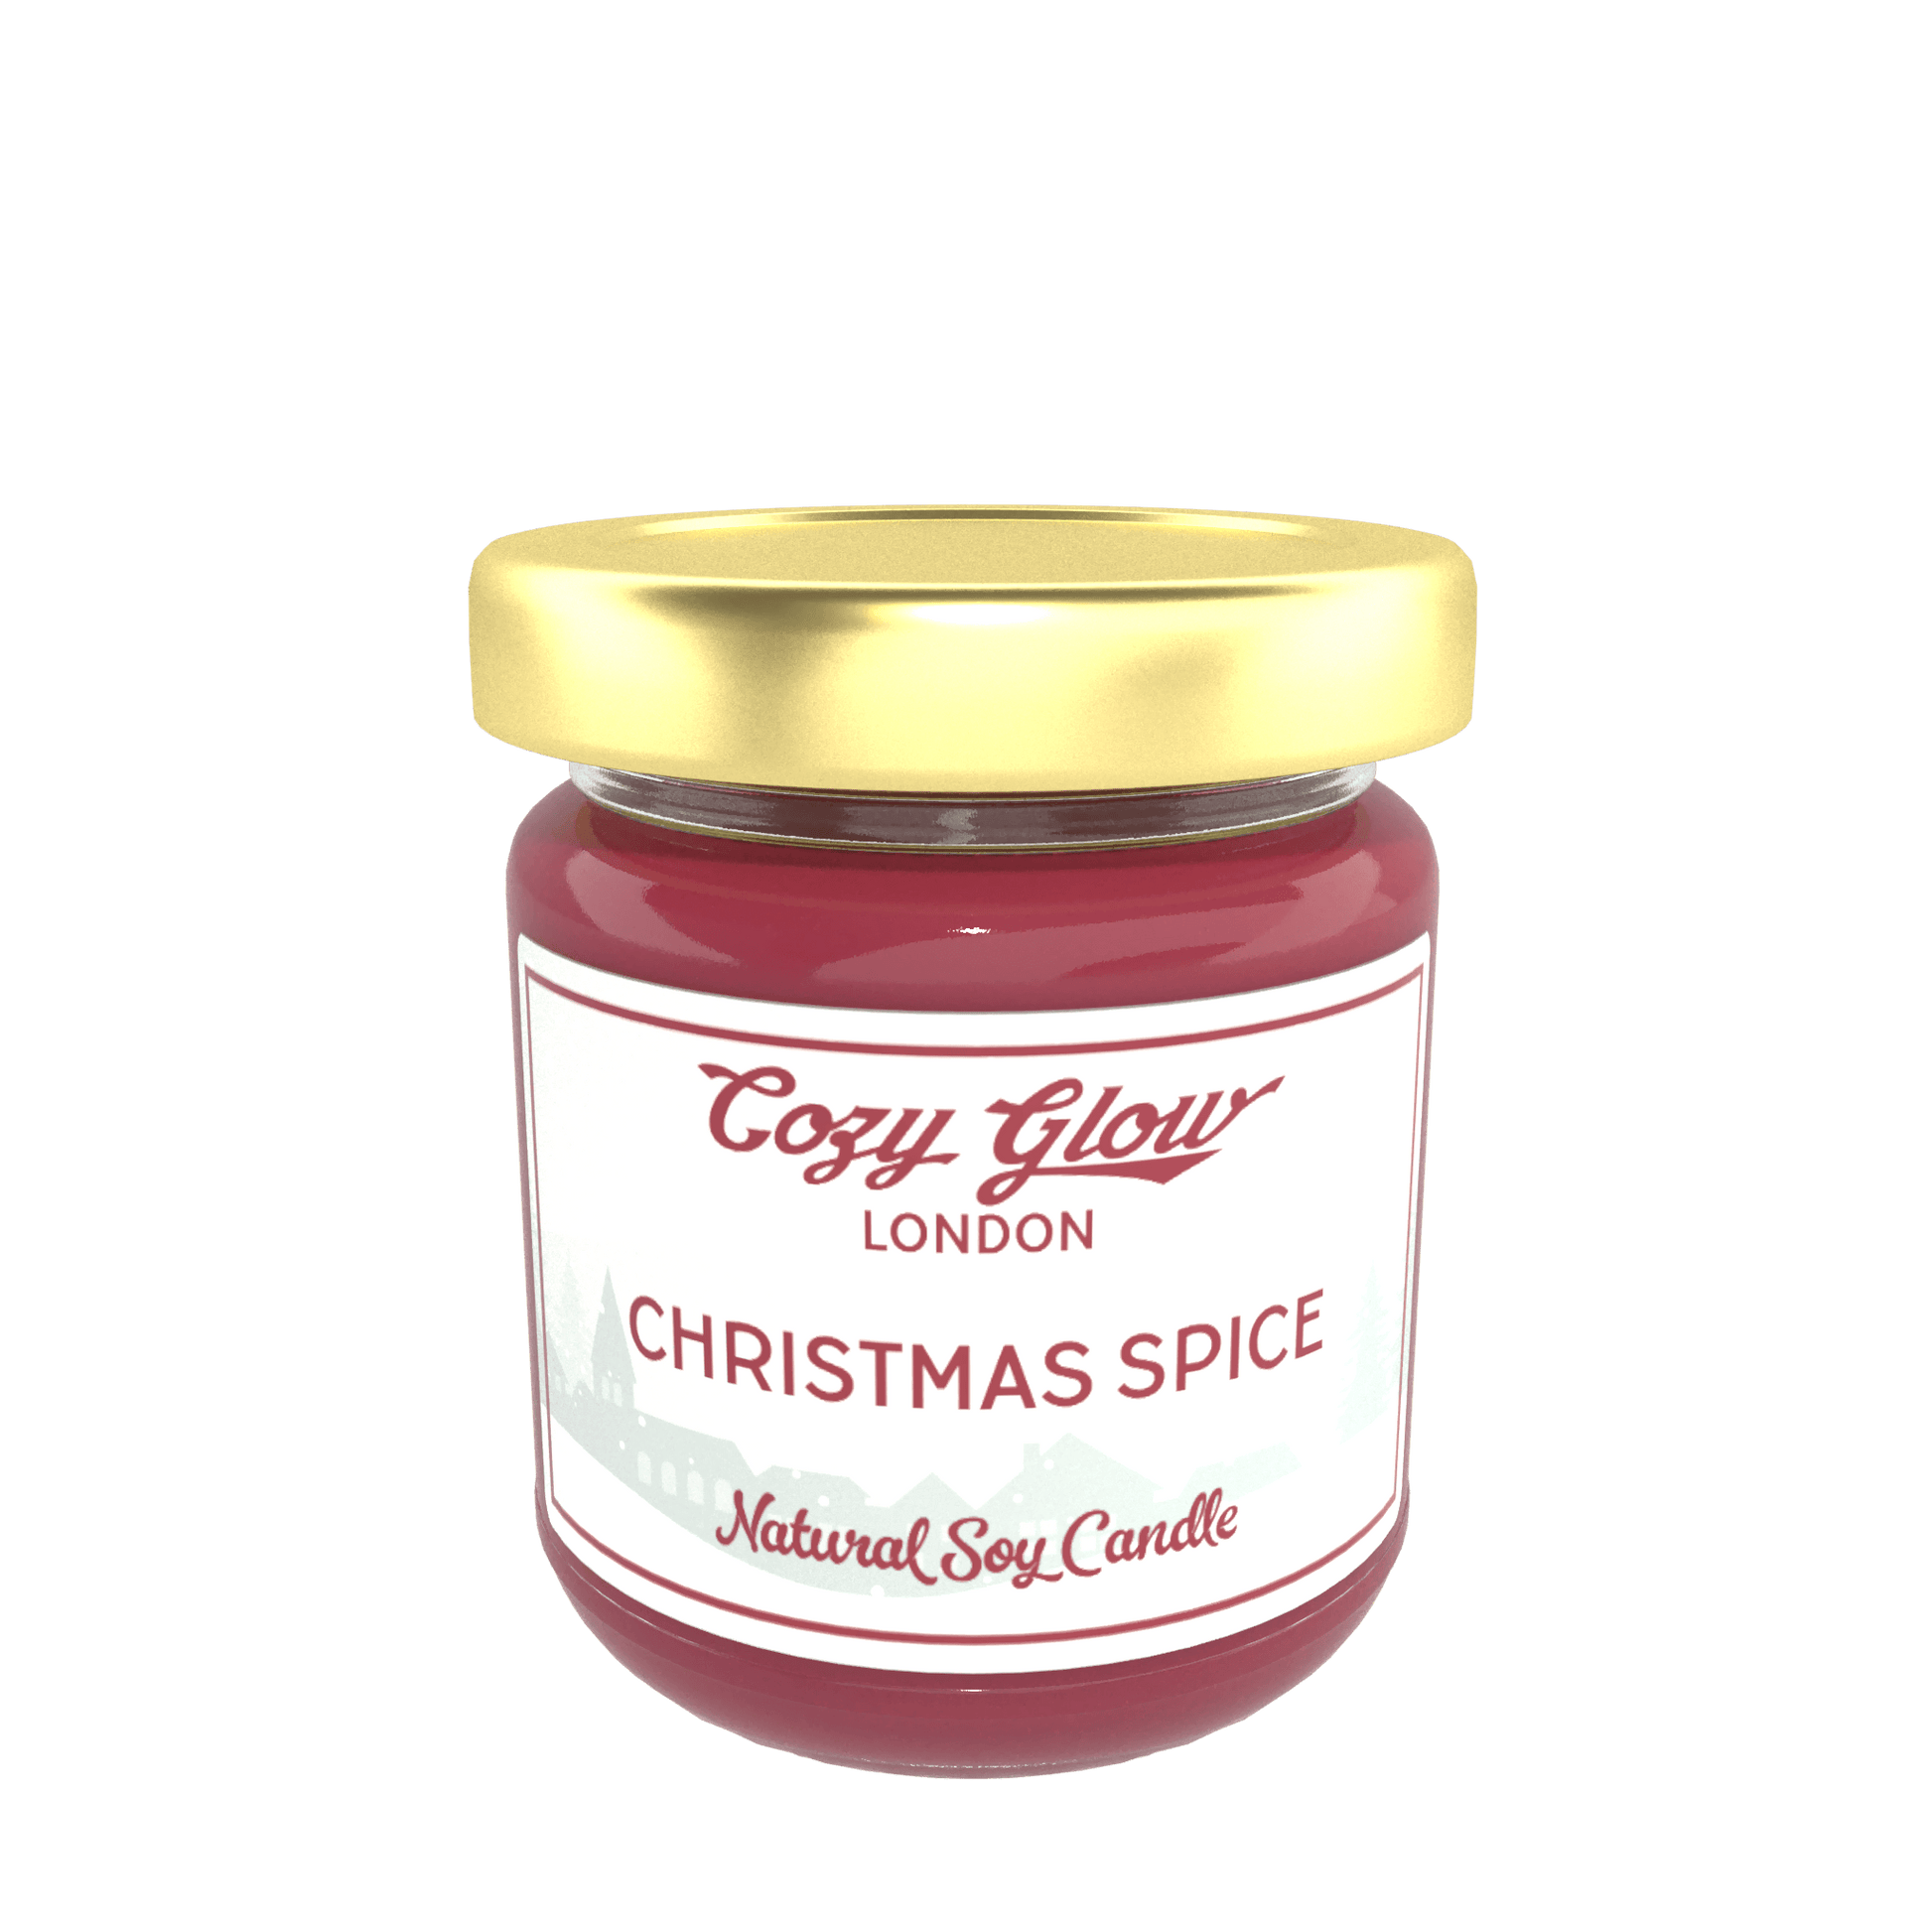 Cozy Glow Christmas Spice Regular Soy Candle